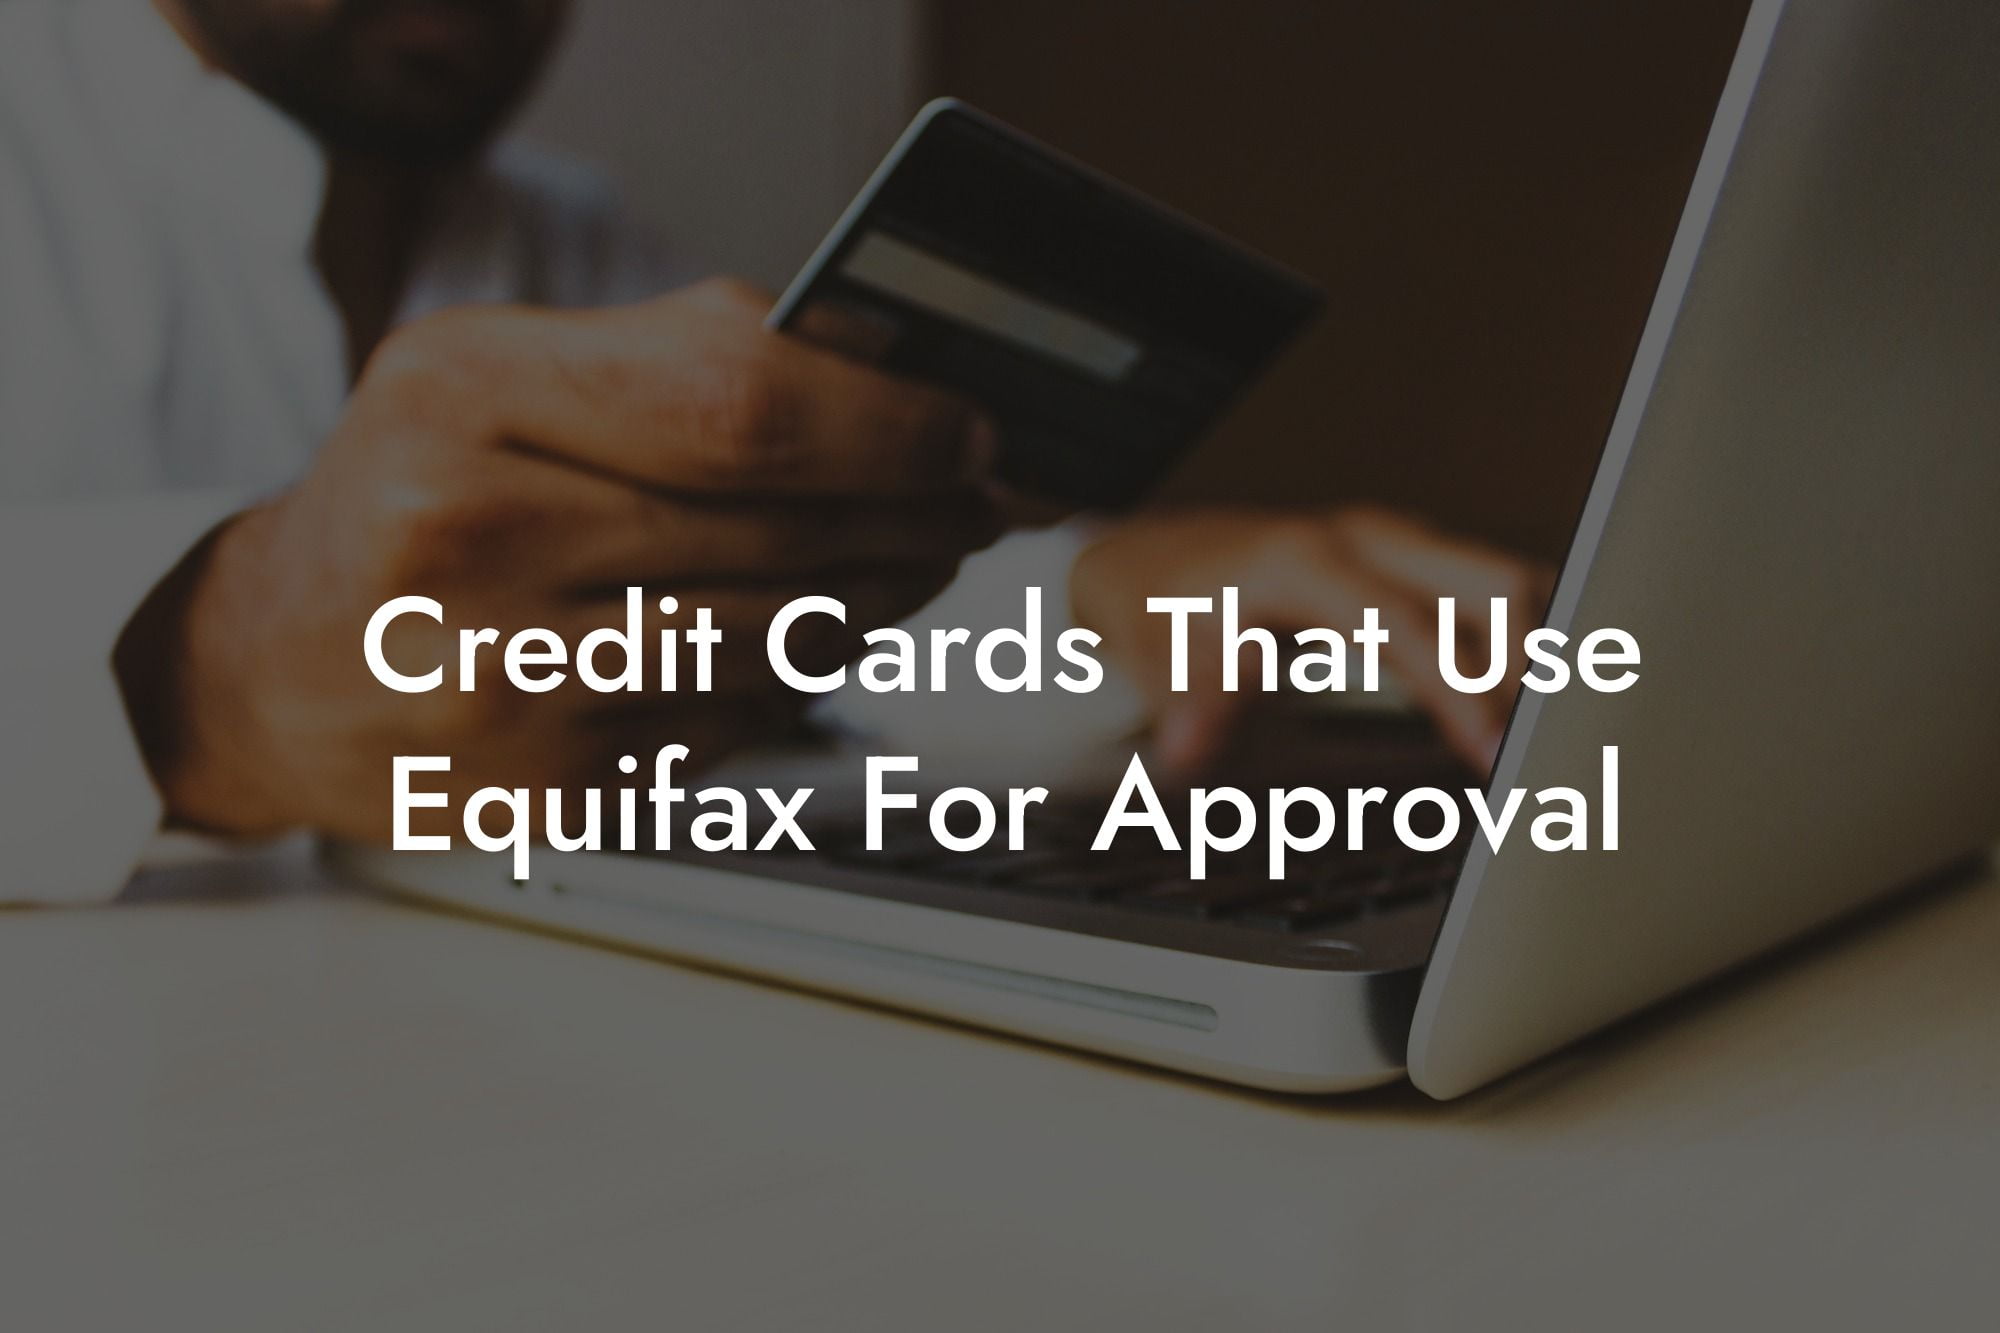 Credit Cards That Use Equifax For Approval